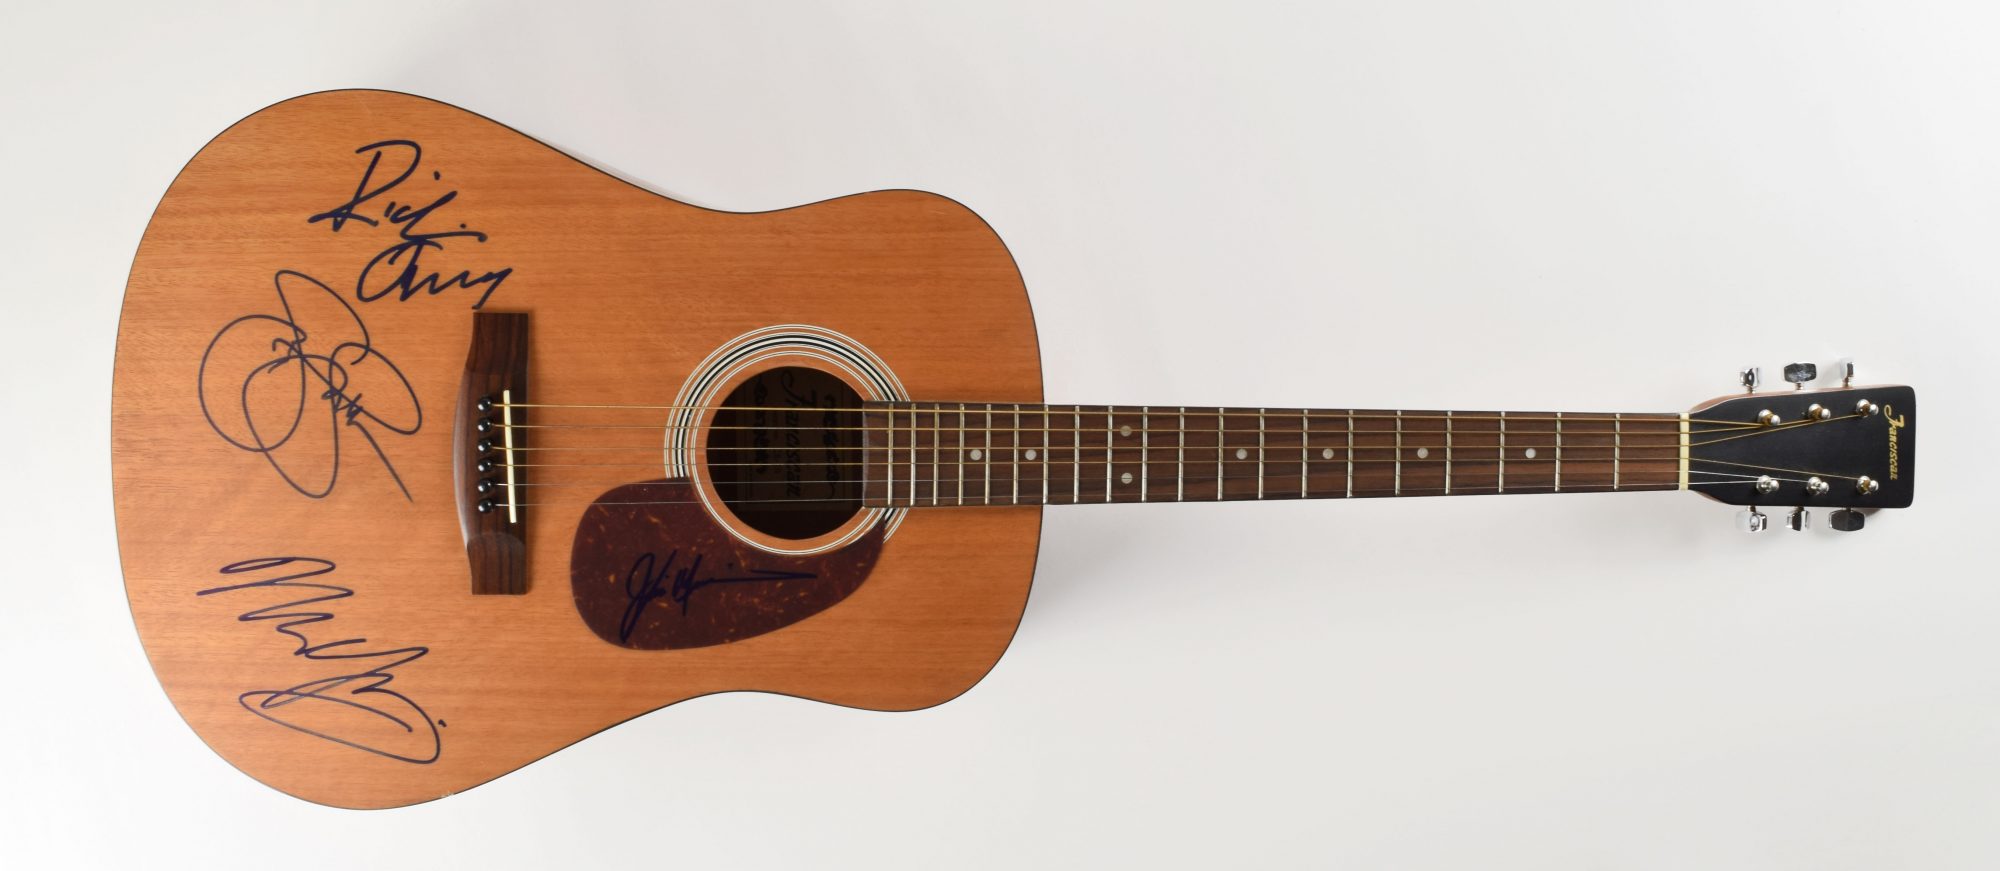 Franciscan natural-finish acoustic guitar autograph Neil Young Stephen Stills Richie Furay Jim Messina John Brennan Collection RR Auction